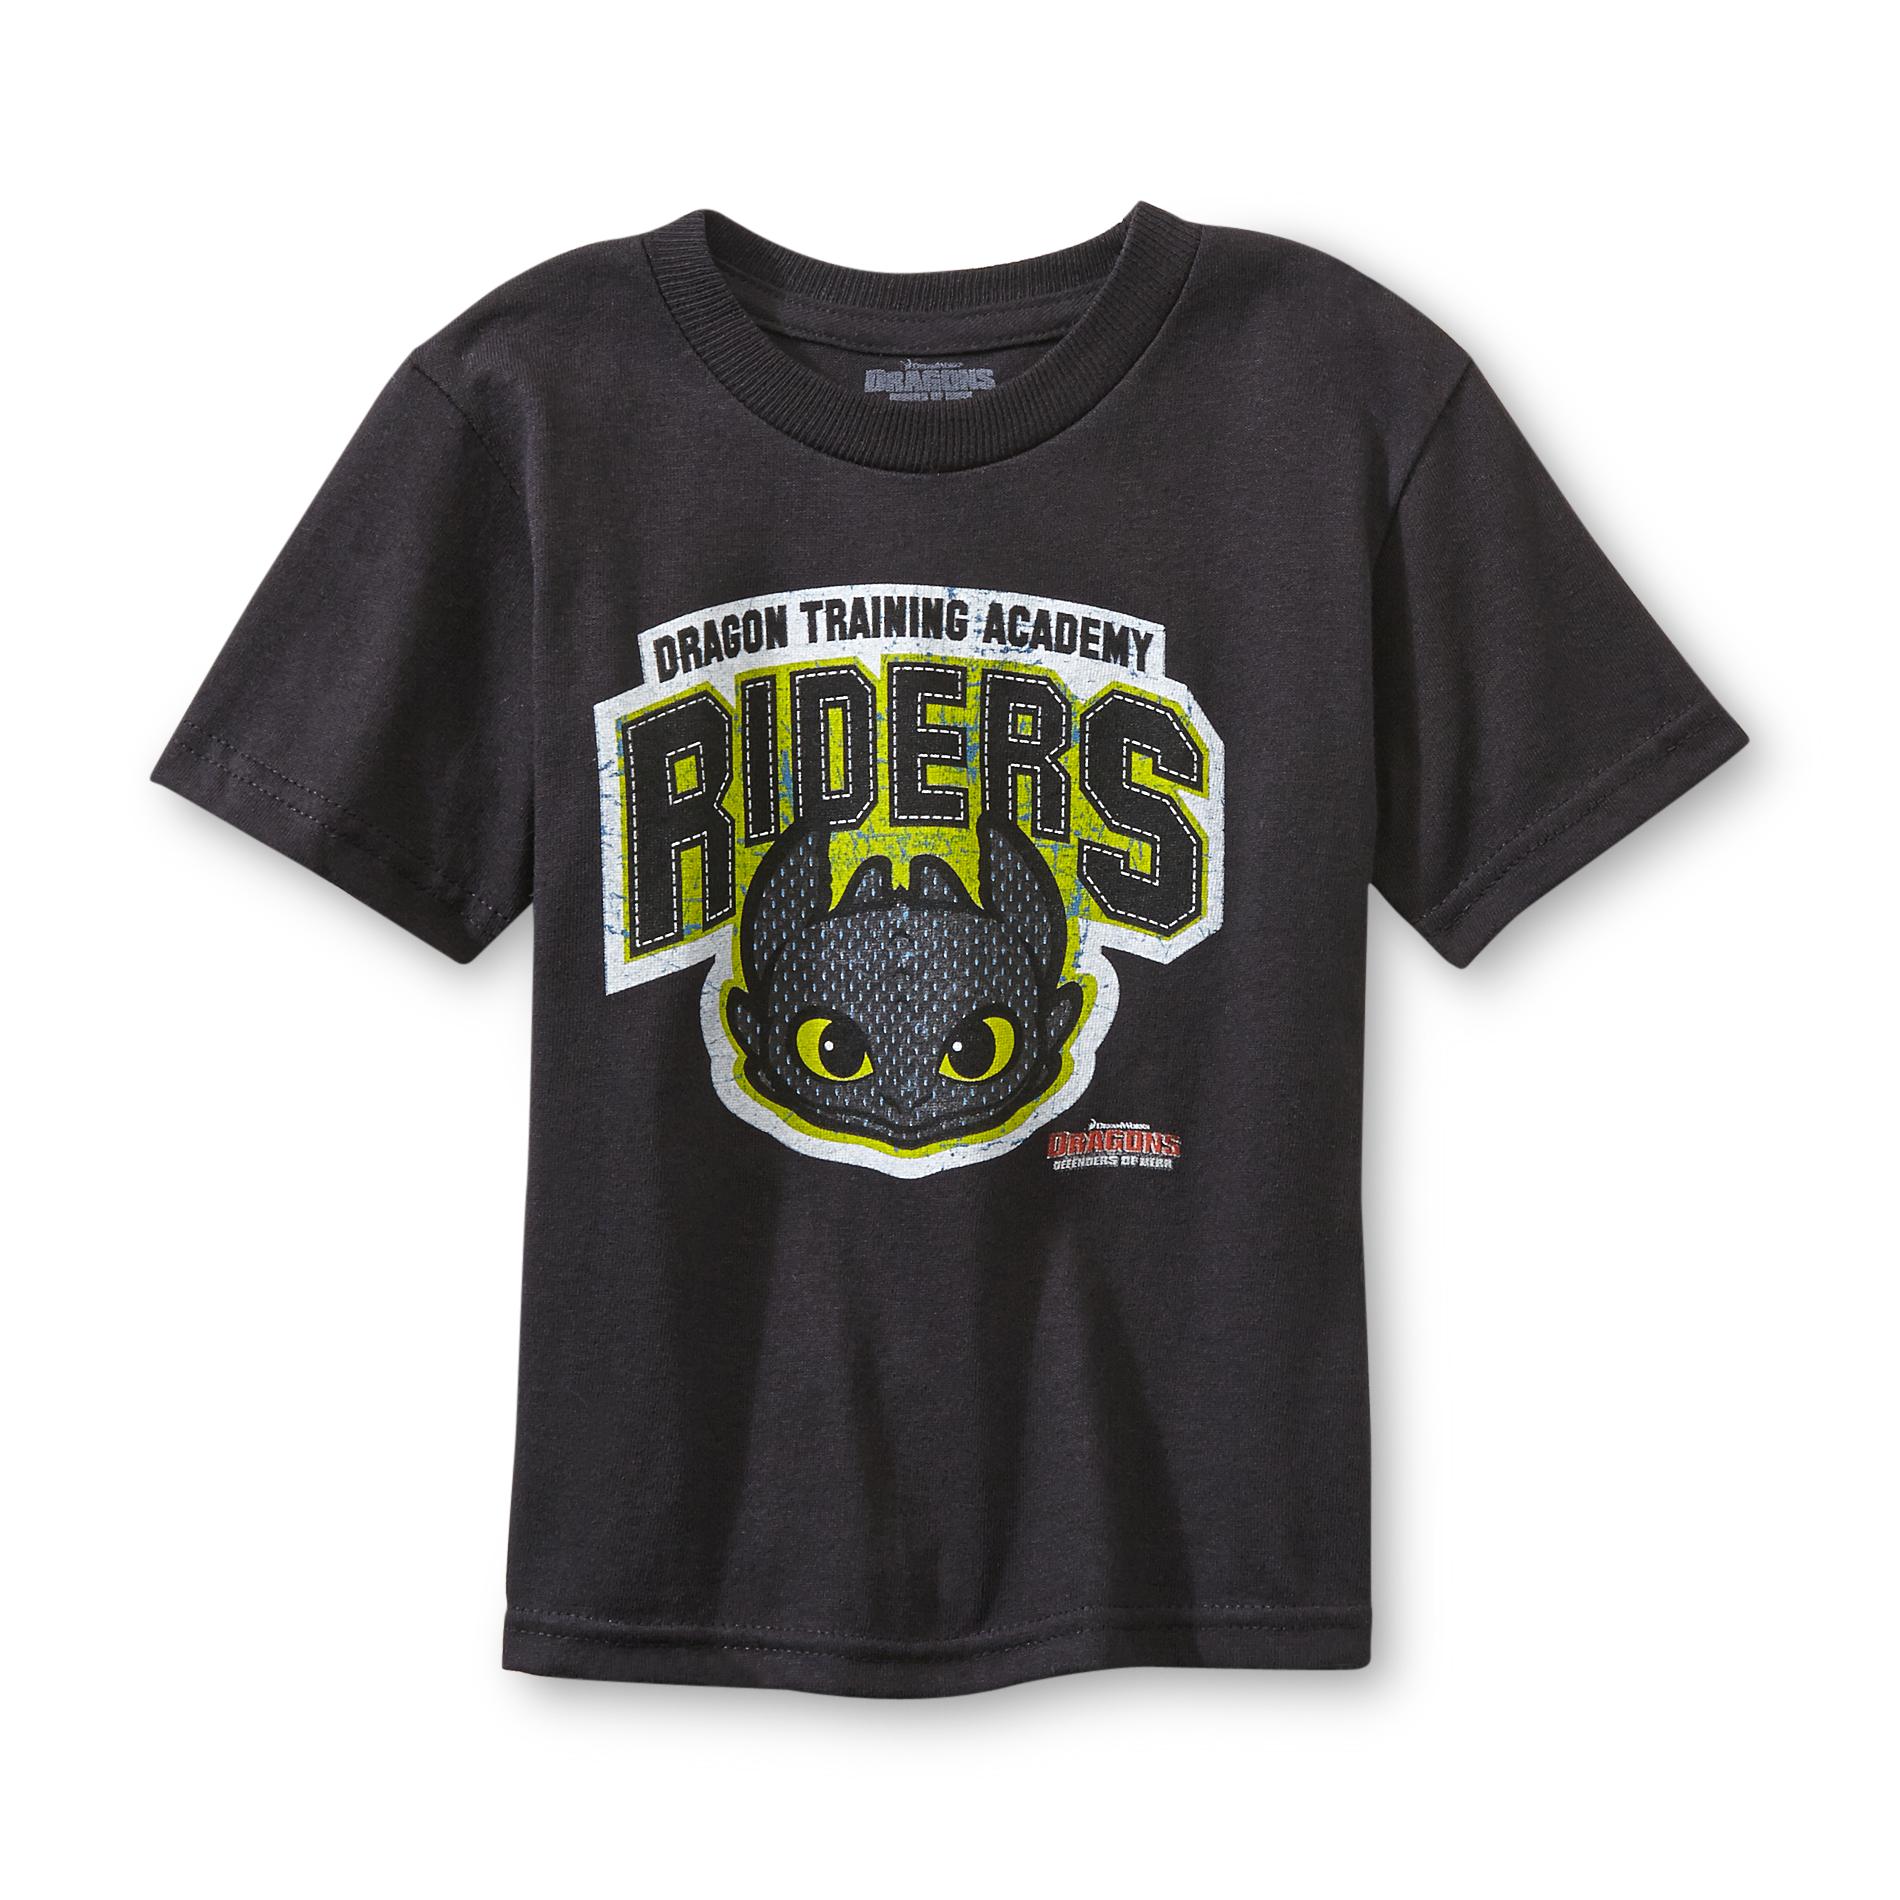 Dreamworks Toddler Boy's Graphic T-Shirt - How To Train Your Dragon